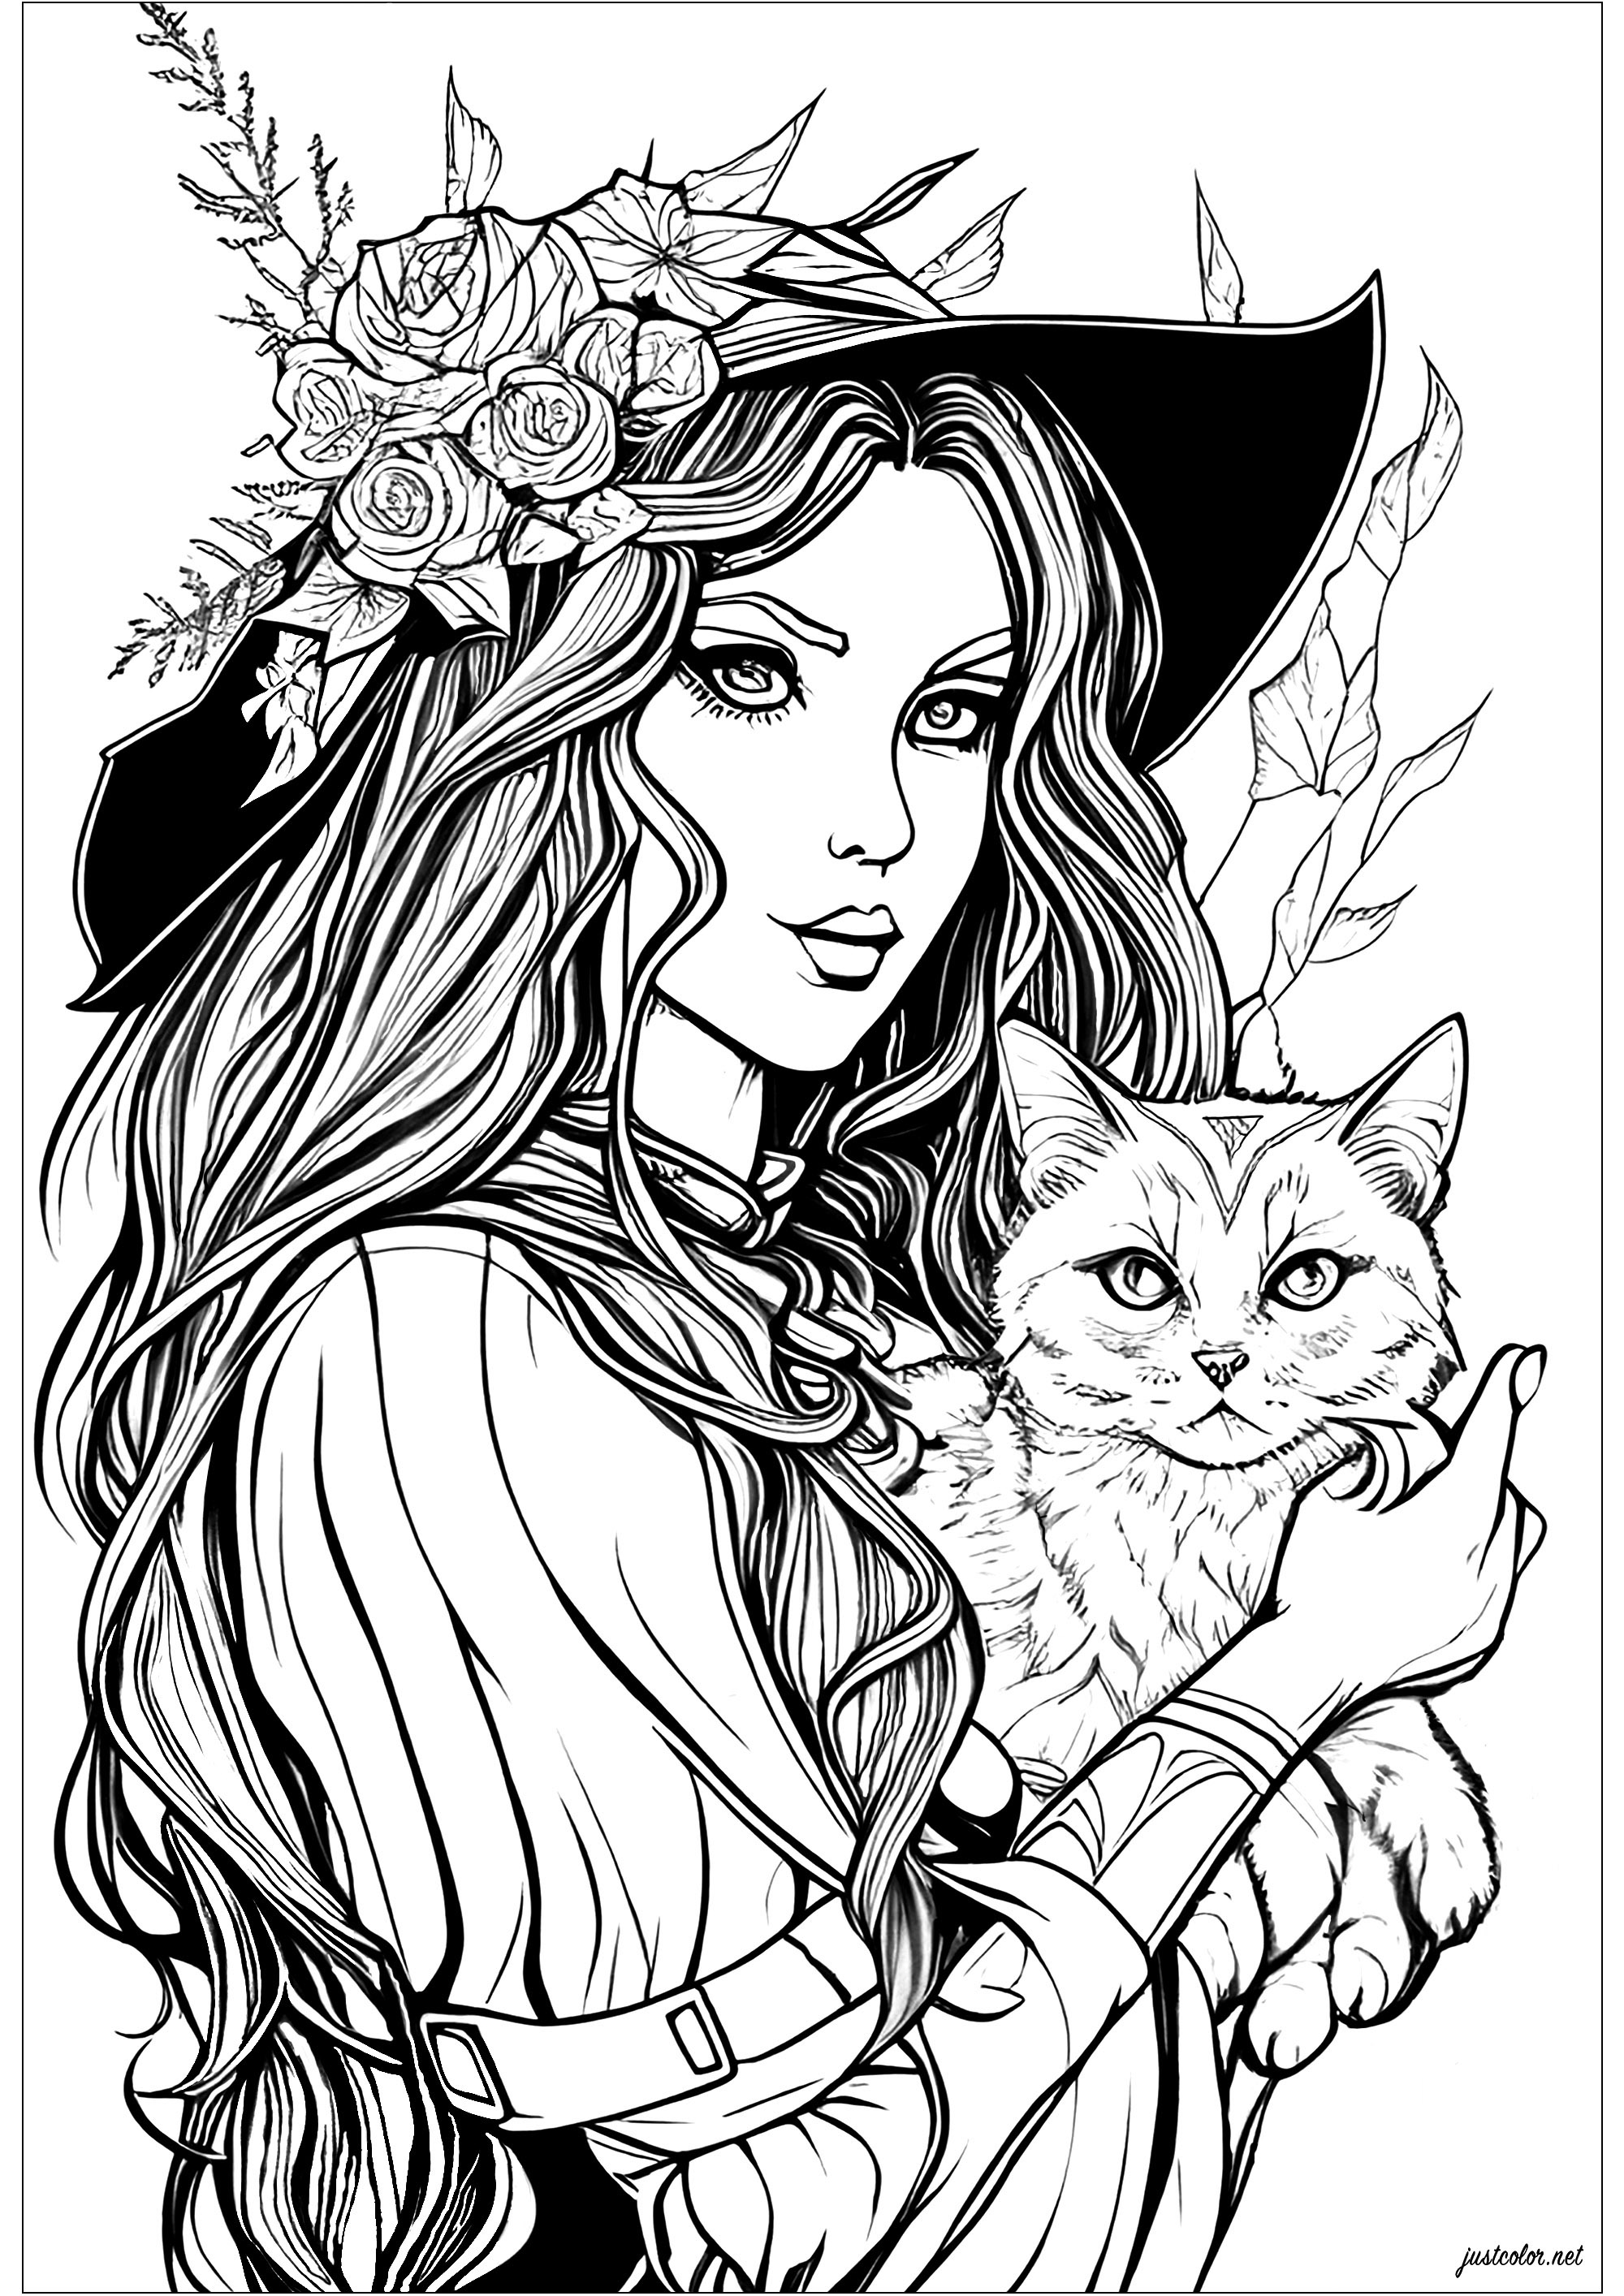 Coloring page of a witch with a bewitching gaze, and her mischievous cat. An evil coloring page, with many details, and with very realistic subjects.